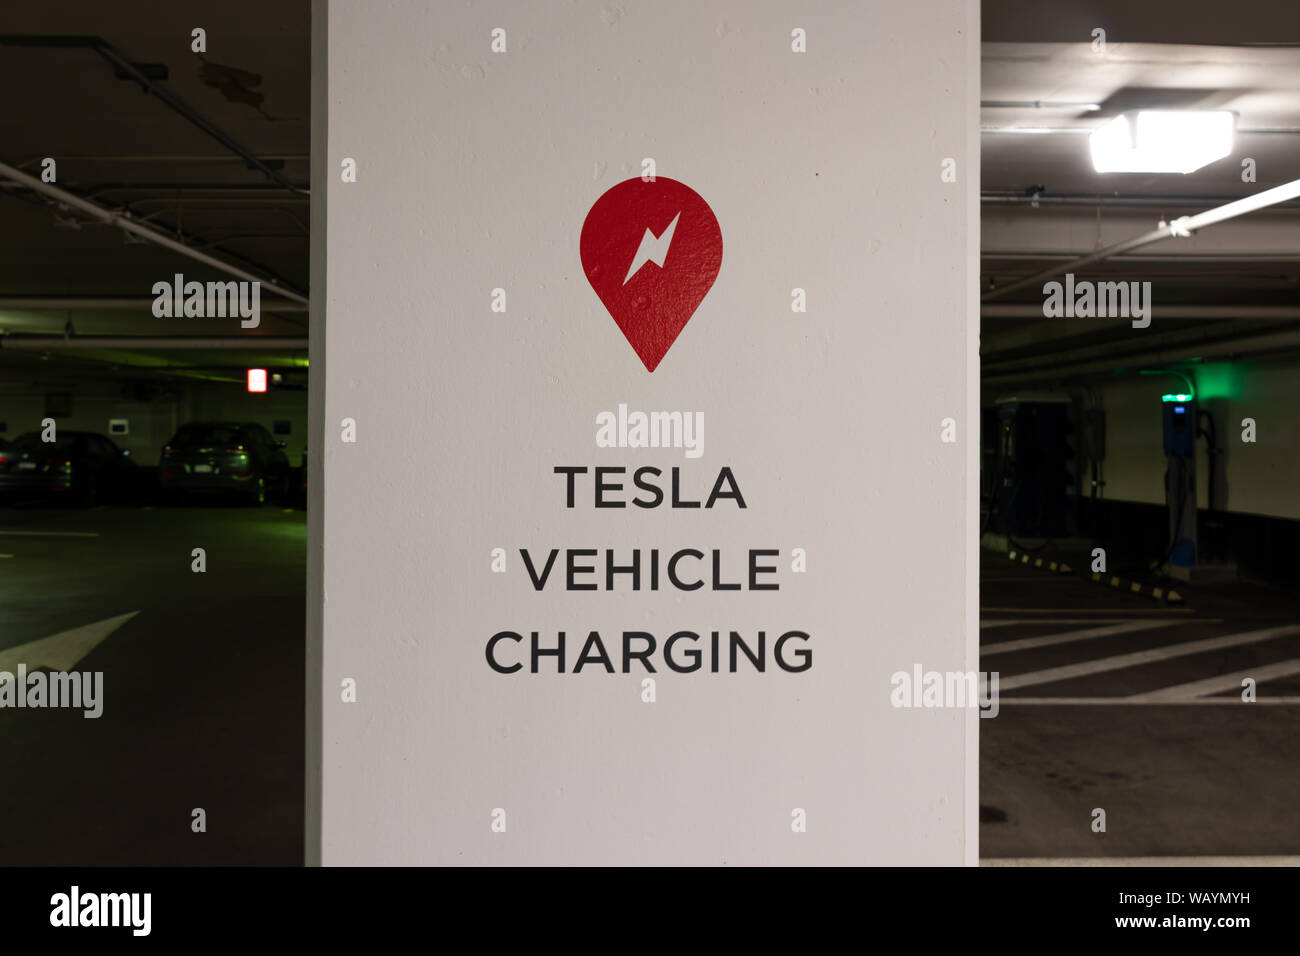 Tesla Supercharger logo and Tesla Vehicle Charging text on post in parking garage in-front of Tesla Supercharger Station. Stock Photo